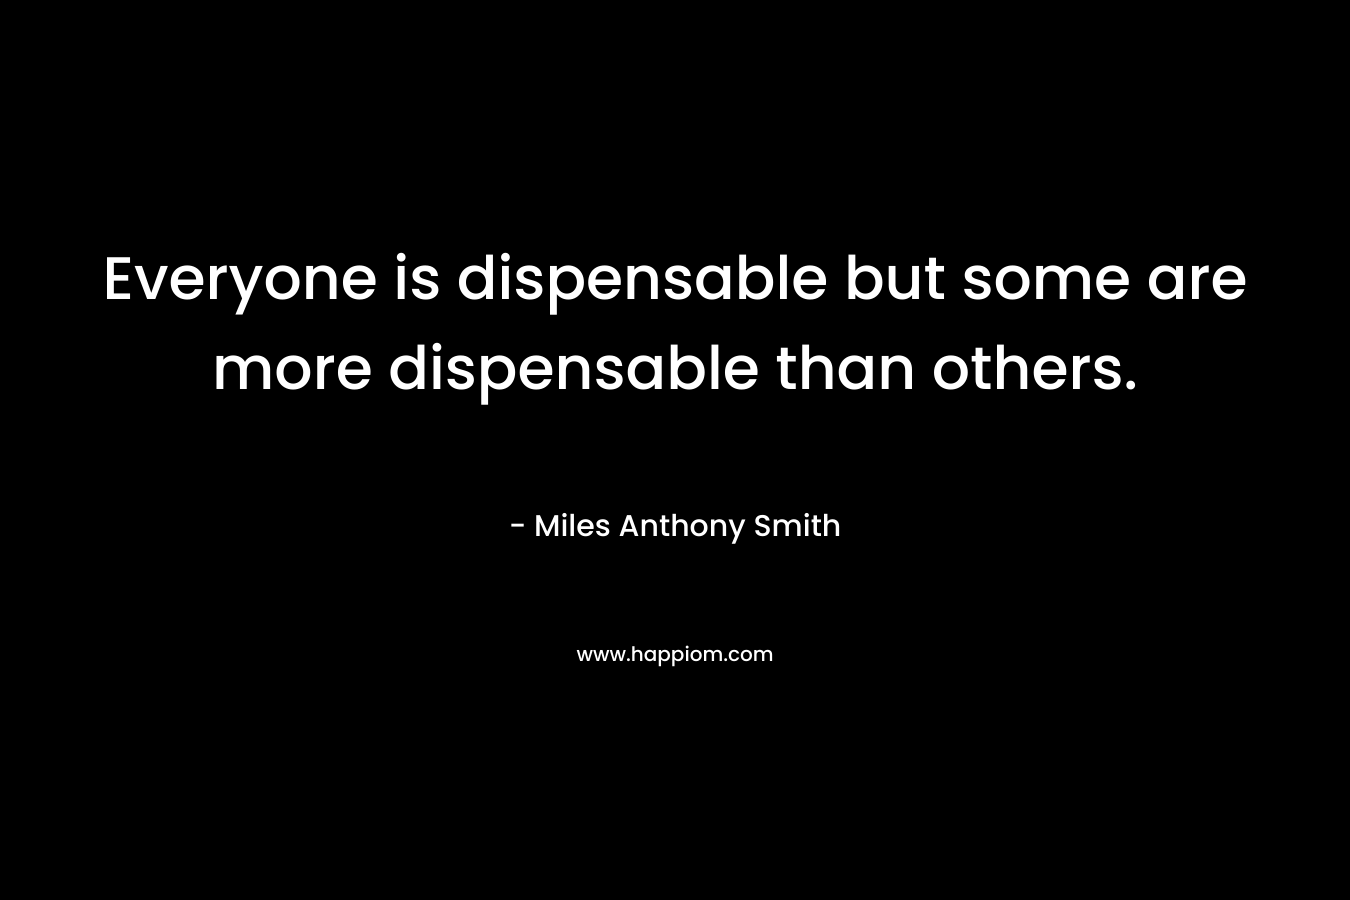 Everyone is dispensable but some are more dispensable than others.